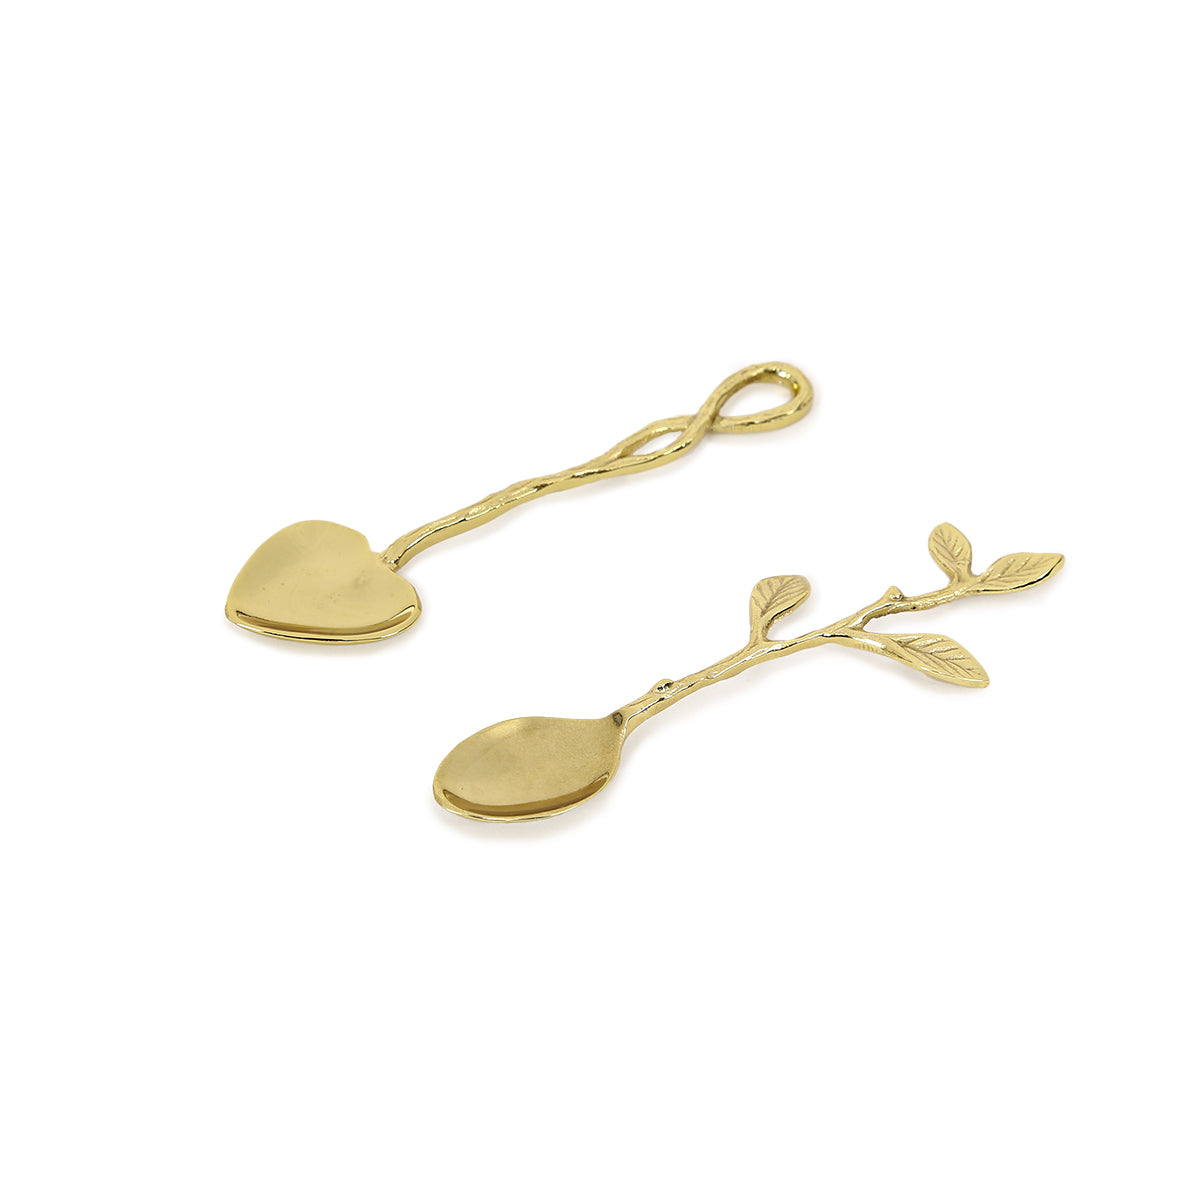 Chaff Coffee Spoons Set Of 2